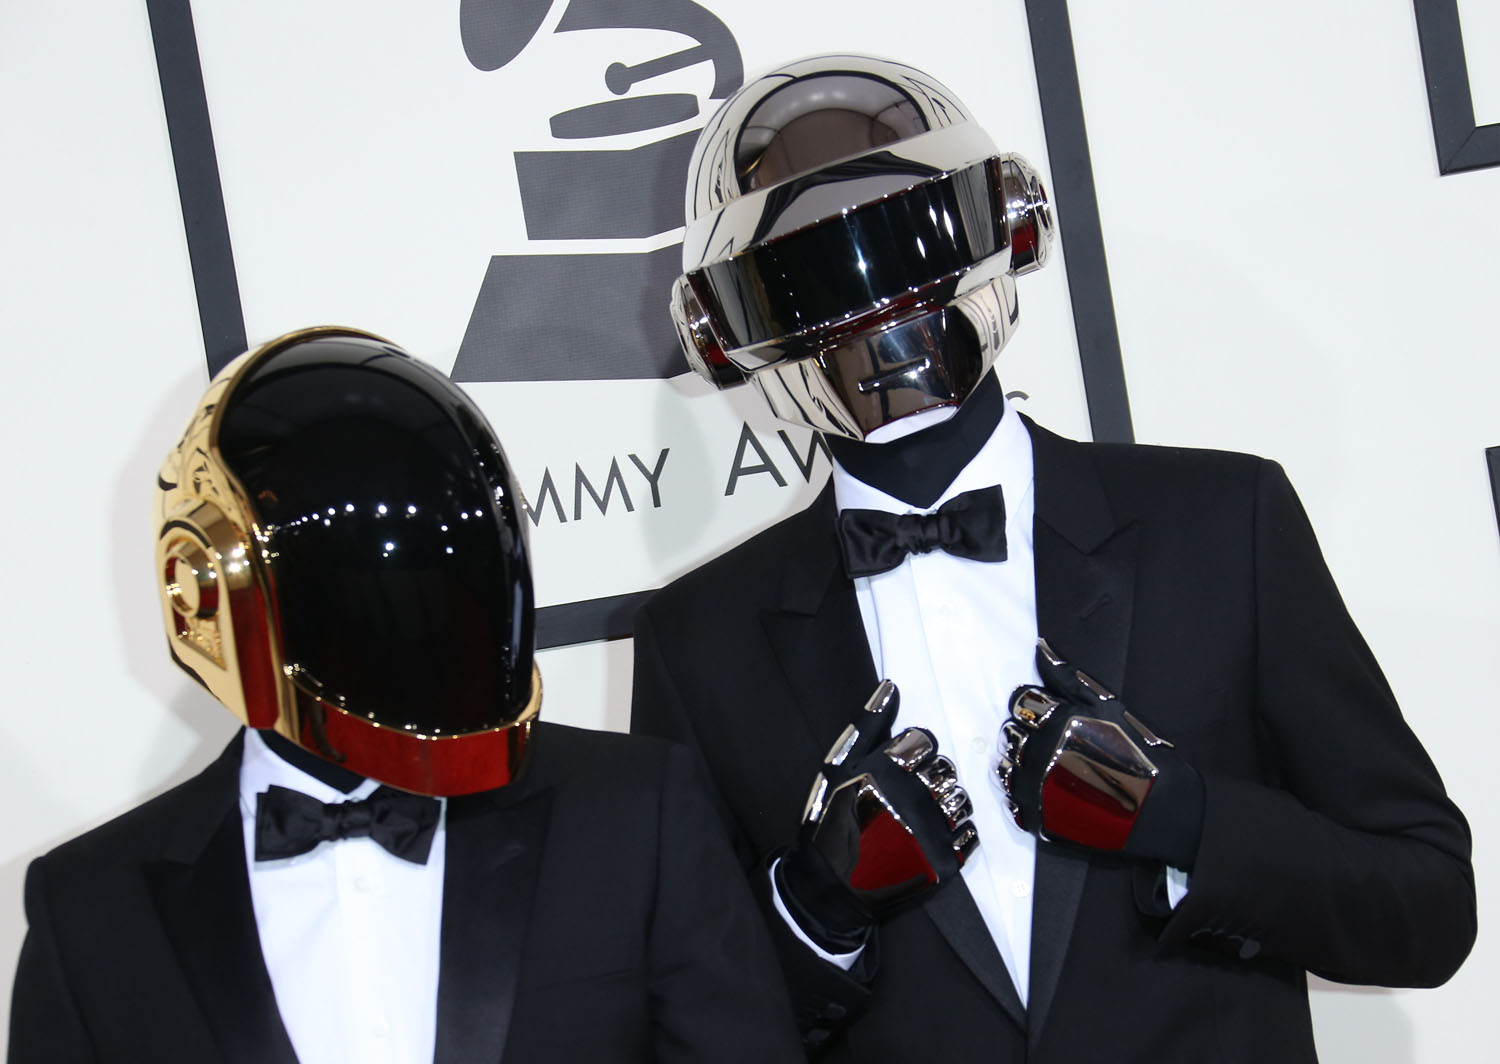 Thomas Bangalter and Guy-Manuel de Homem-Christo of 'Daft Punk' arrive at the 56th Annual GRAMMY Awards at Staples Center on January 26, 2014 in Los Angeles, California.